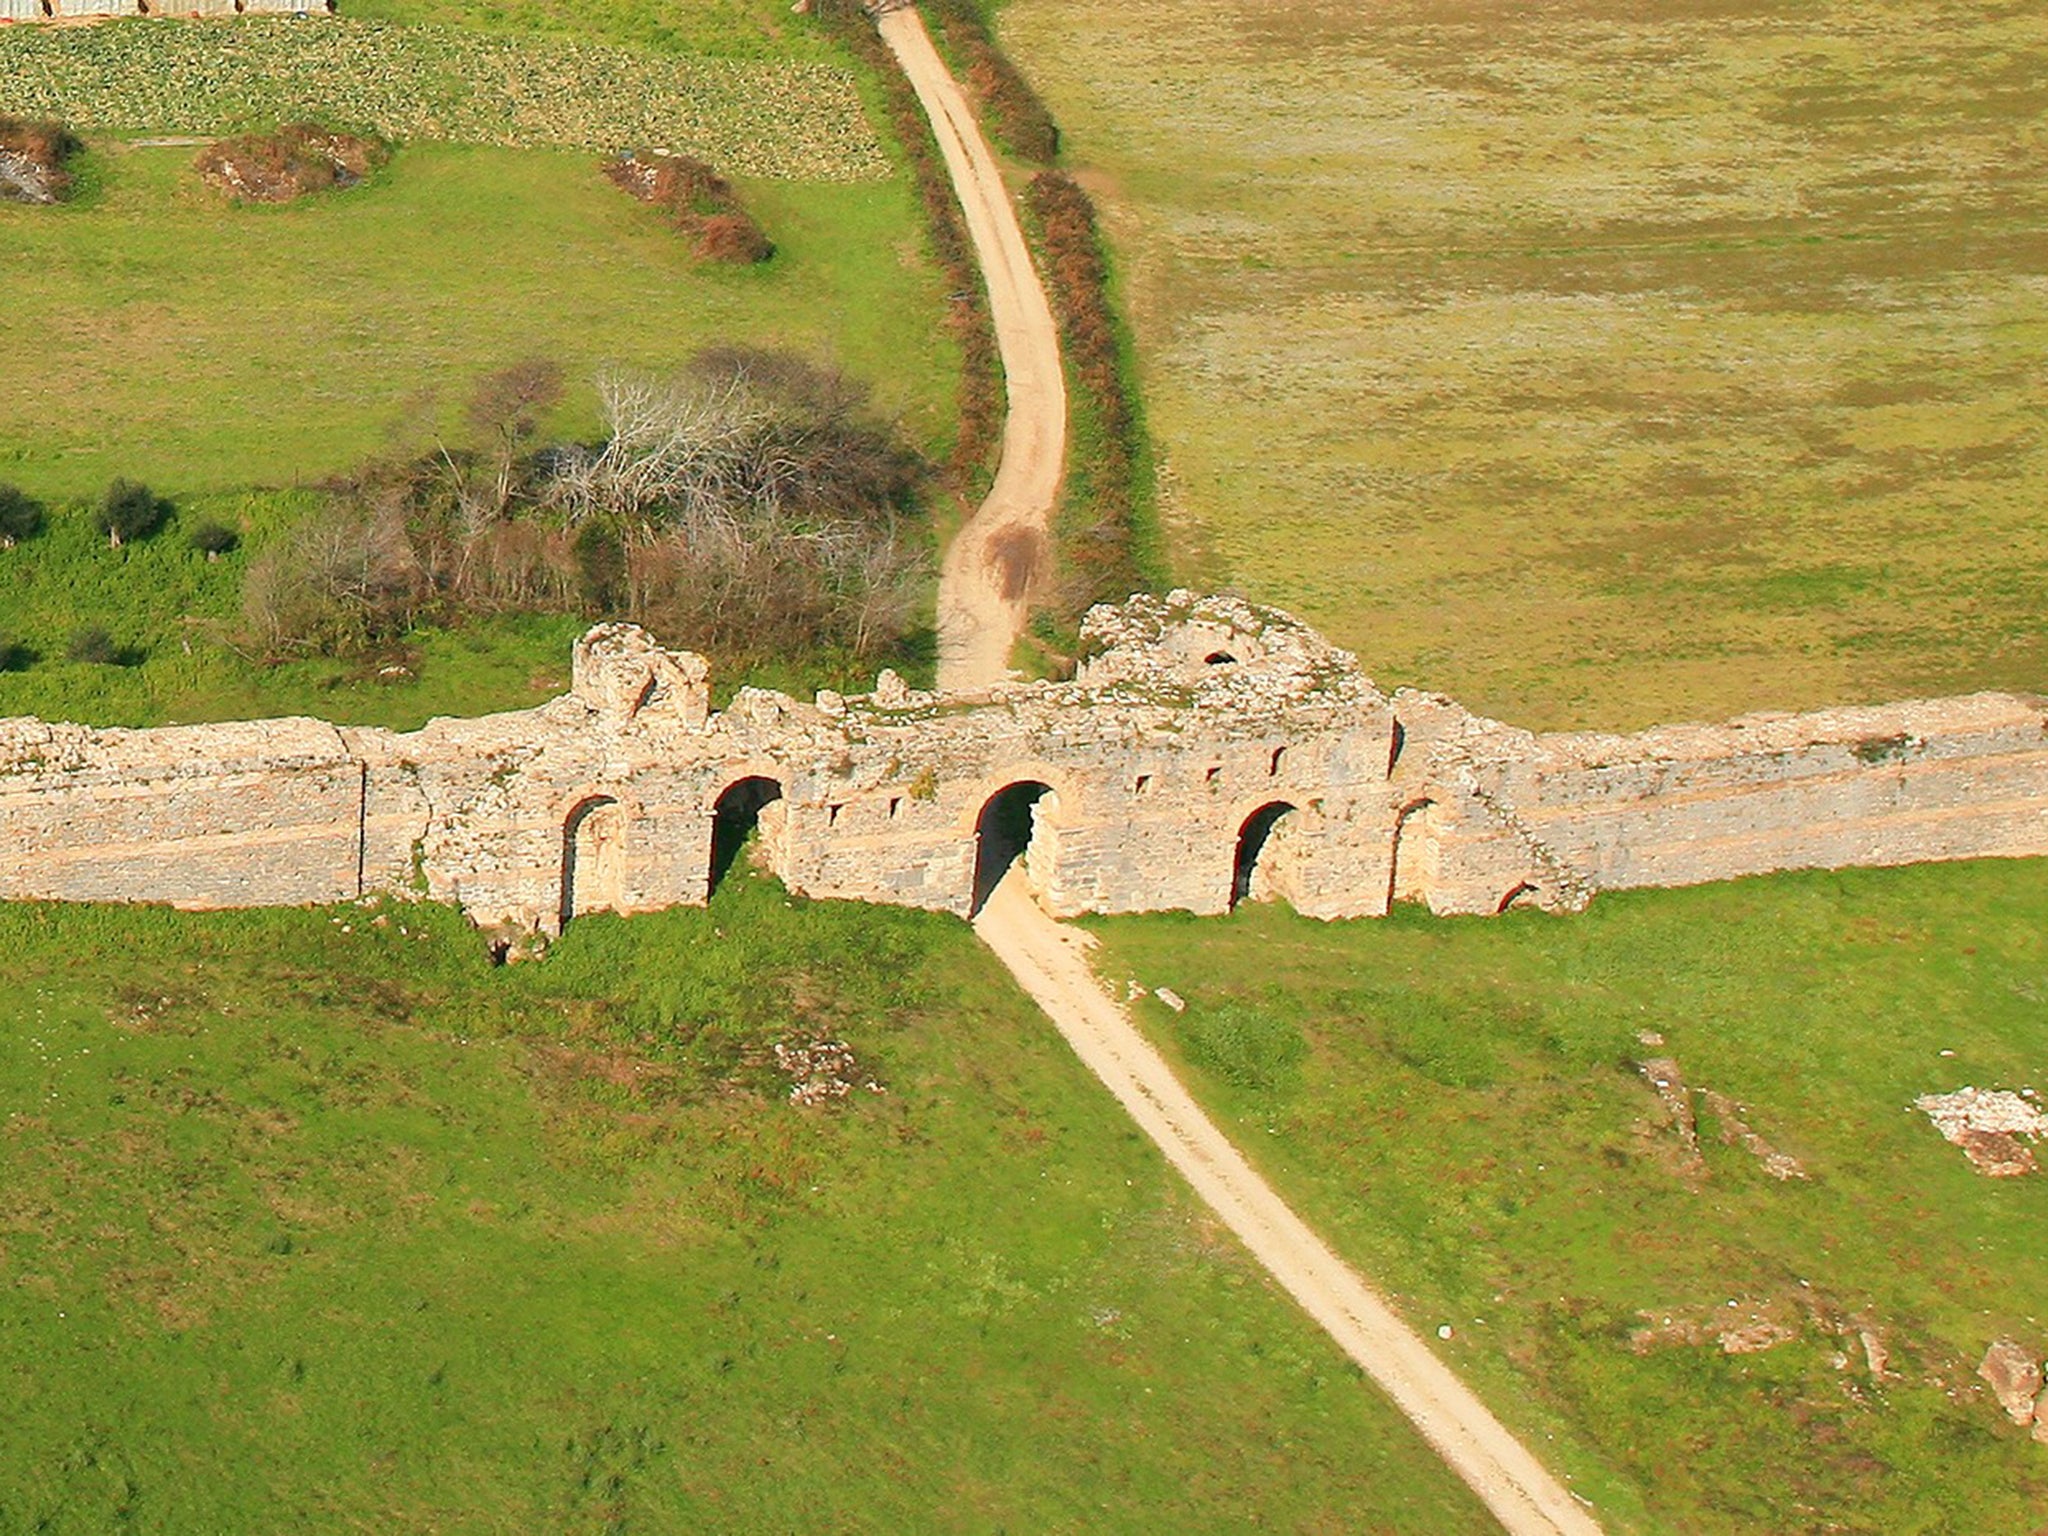 A section of the city walls of Nicopolis